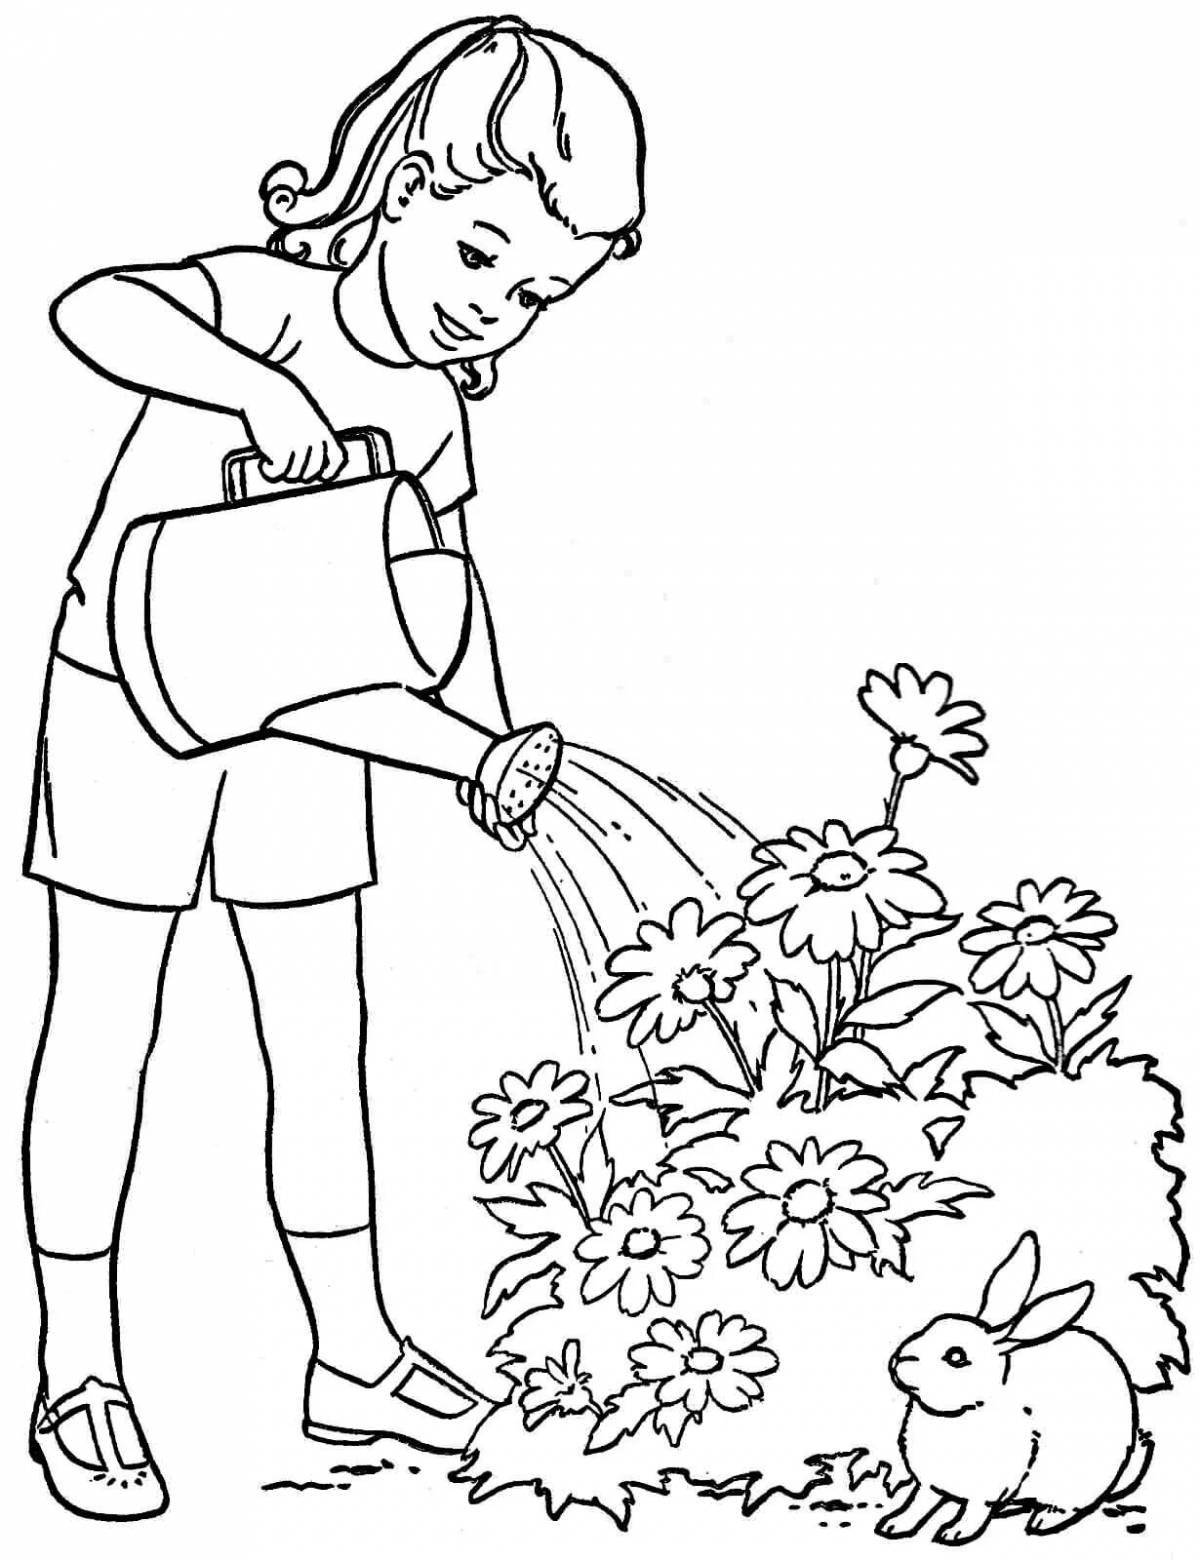 Amazing Good Deeds Coloring Page